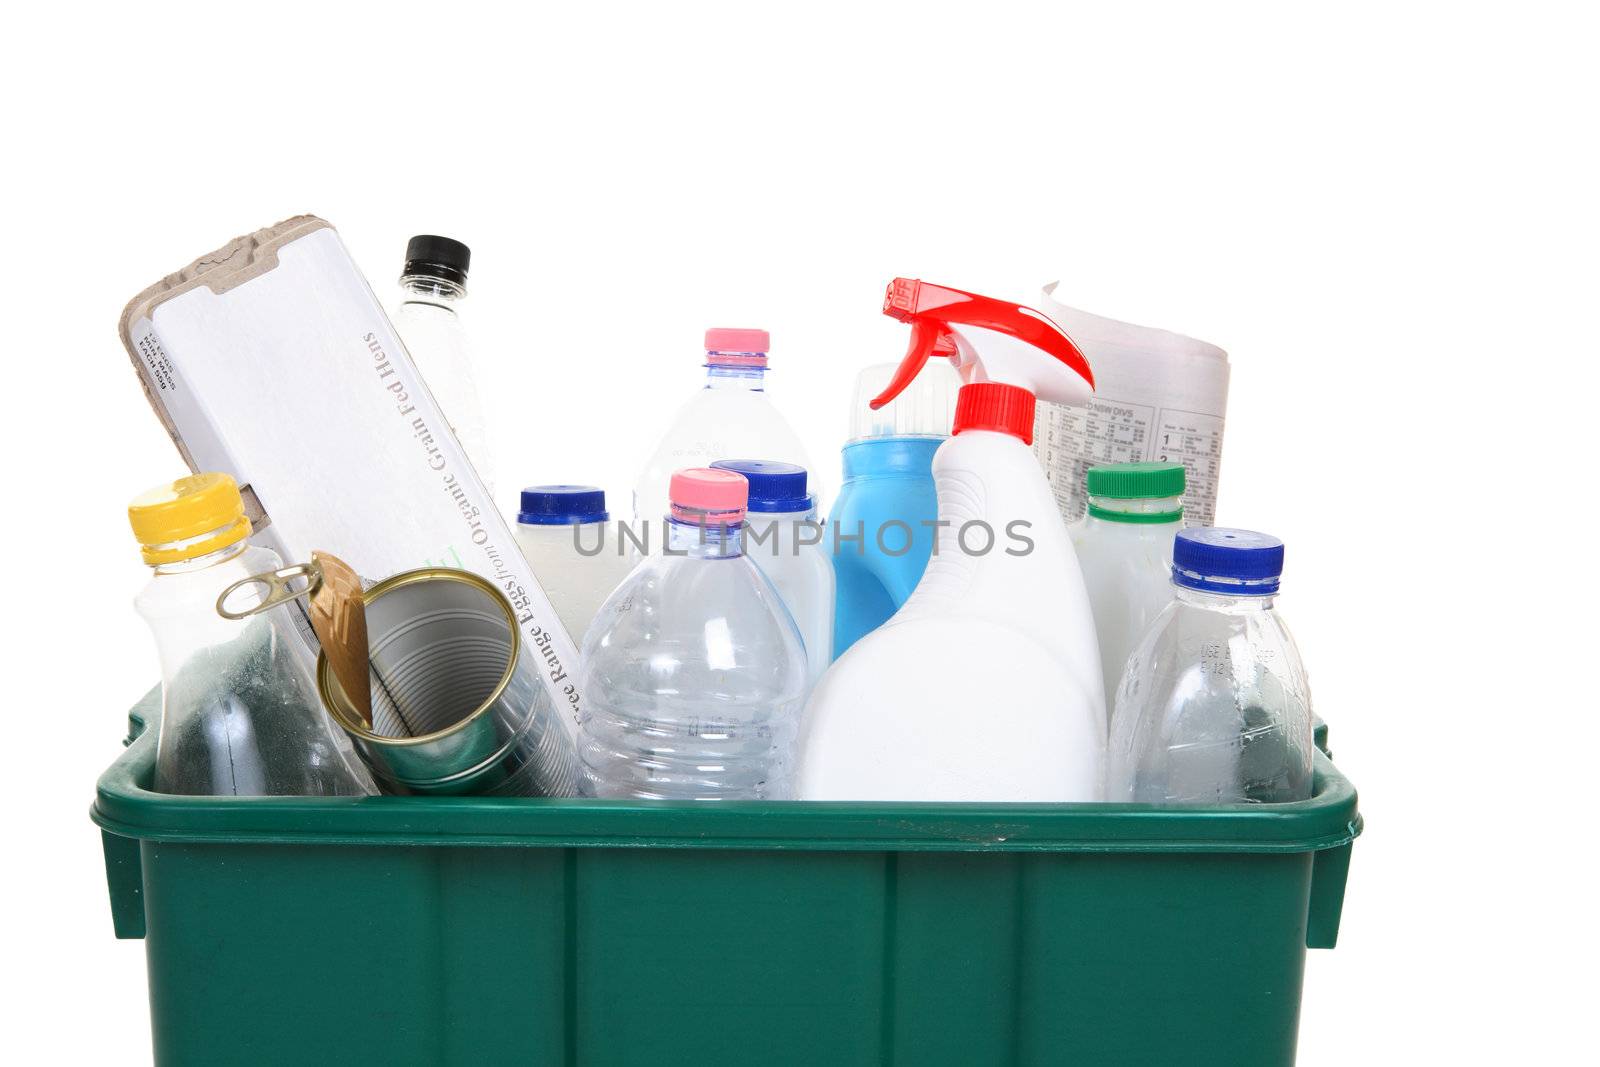 A collection of empty bottles, cans, paper and other containers in a recycling bin